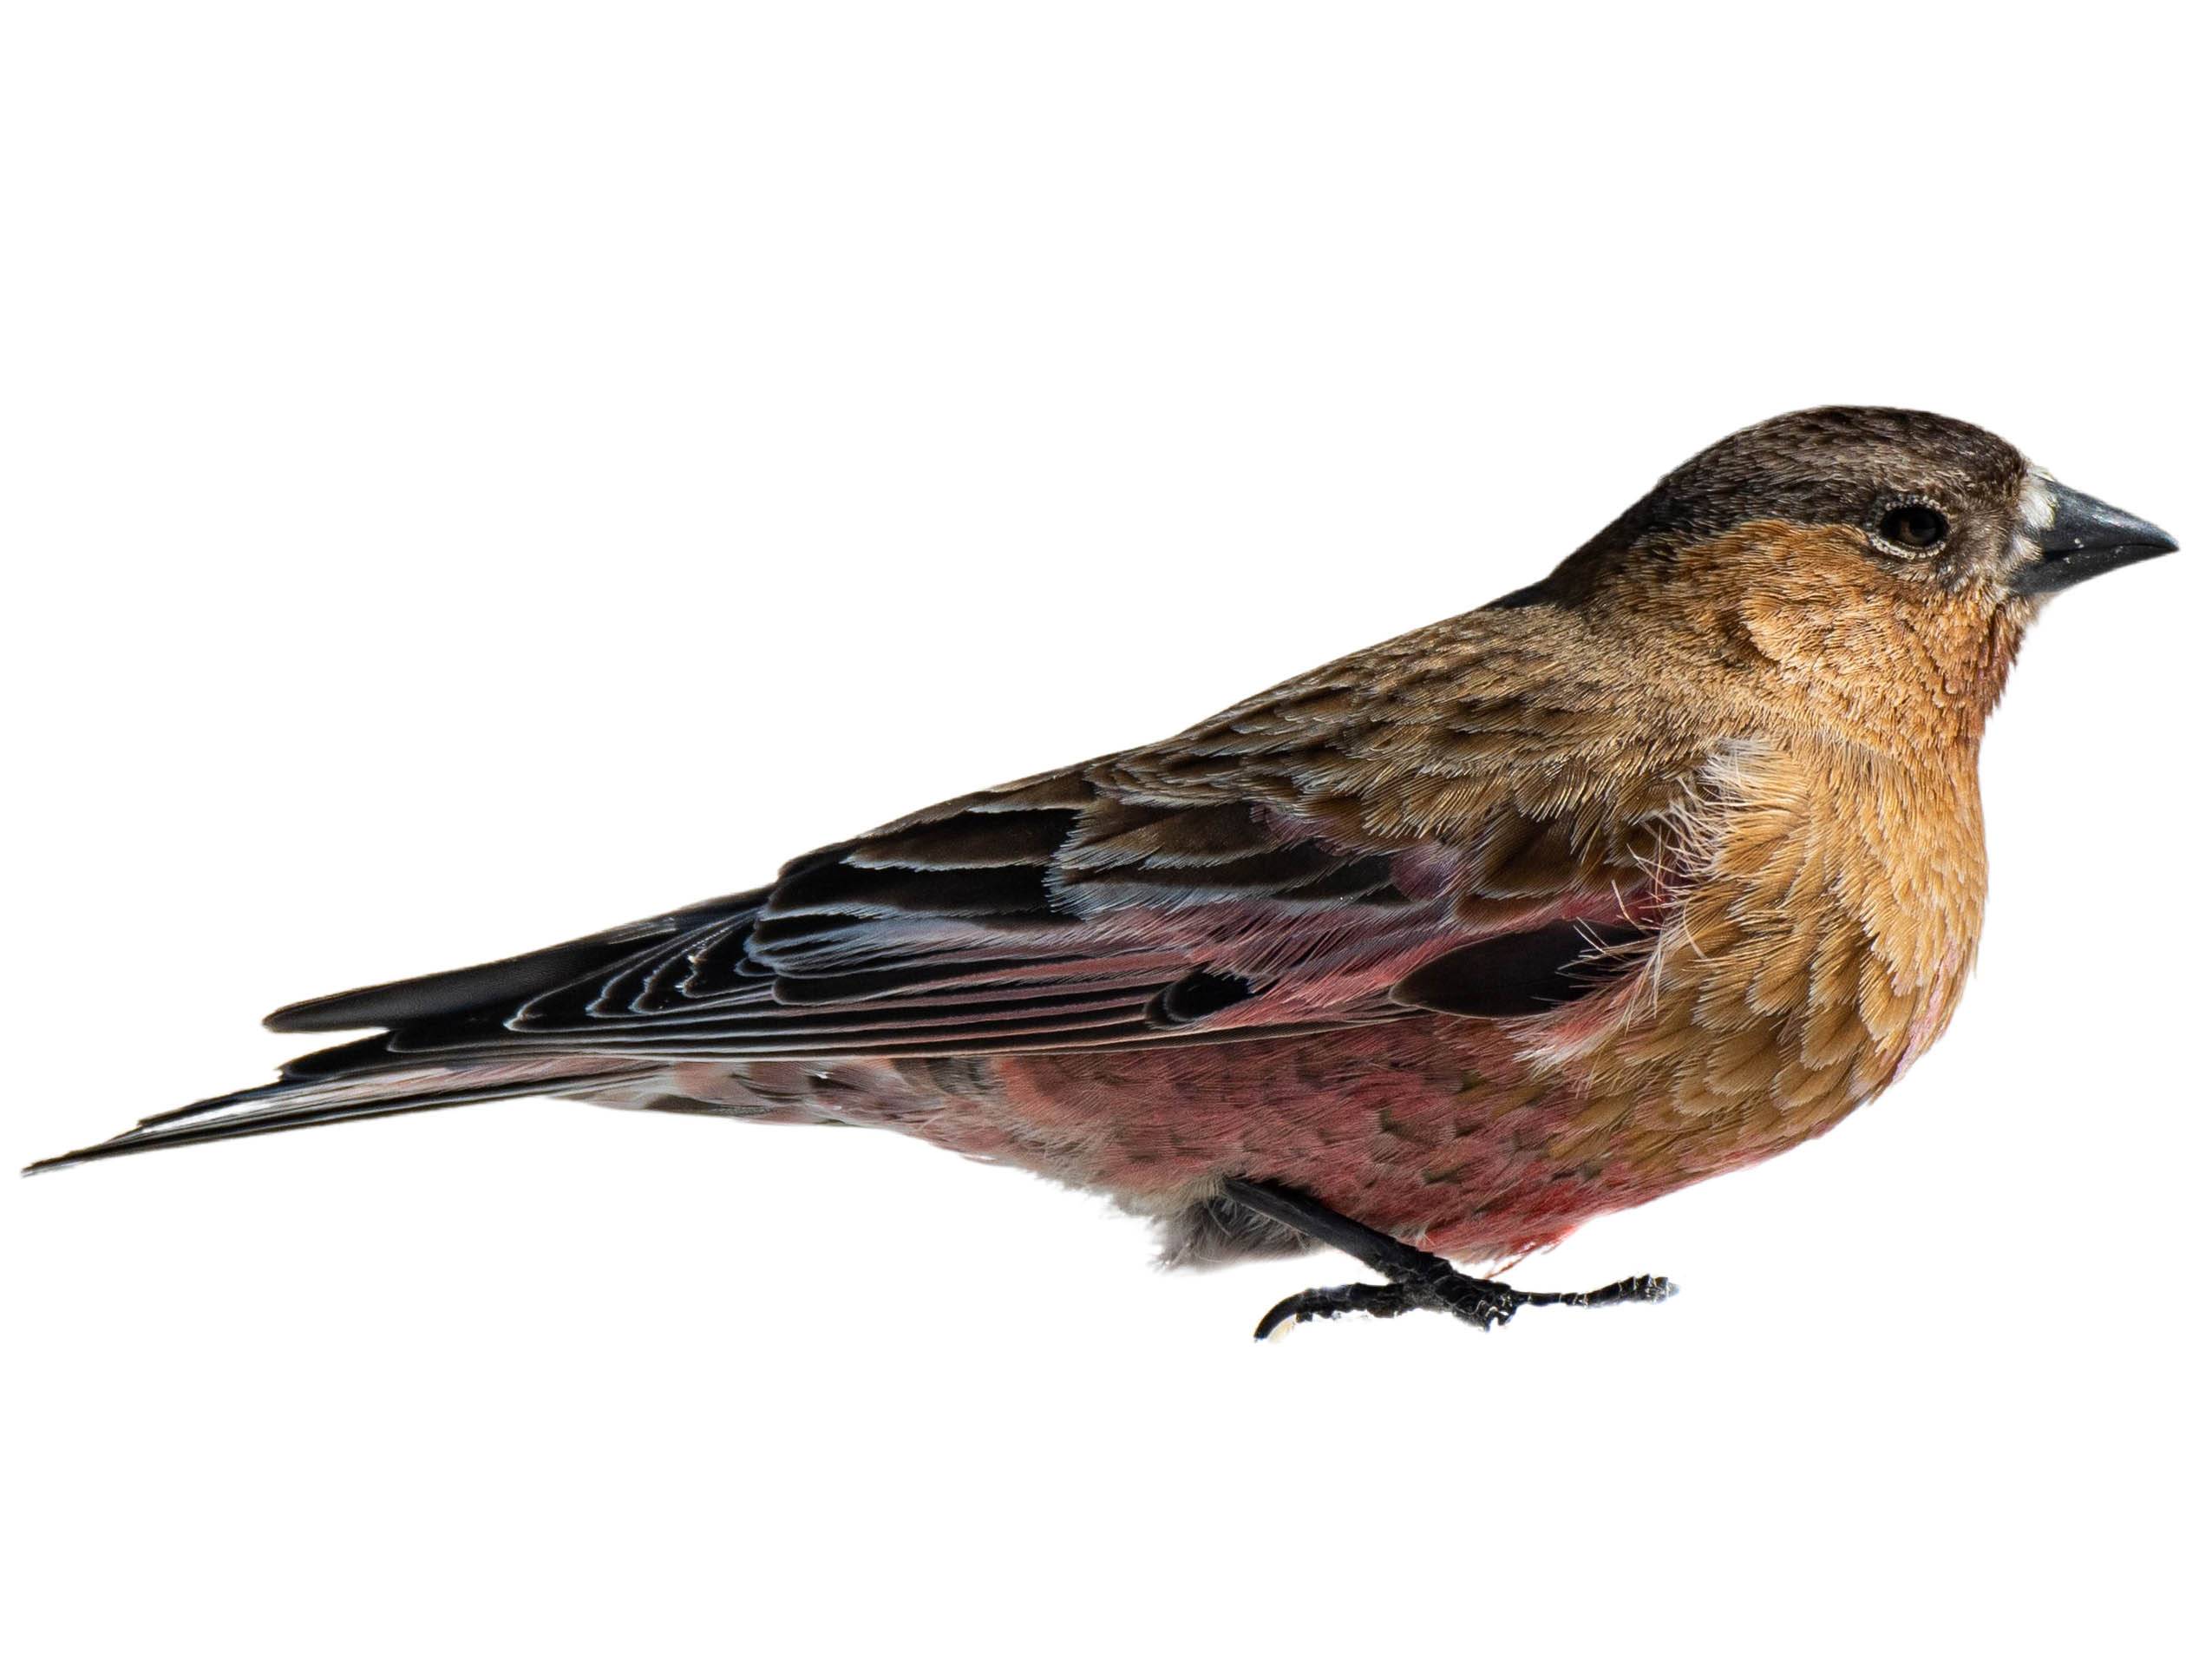 A photo of a Brown-capped Rosy Finch (Leucosticte australis)